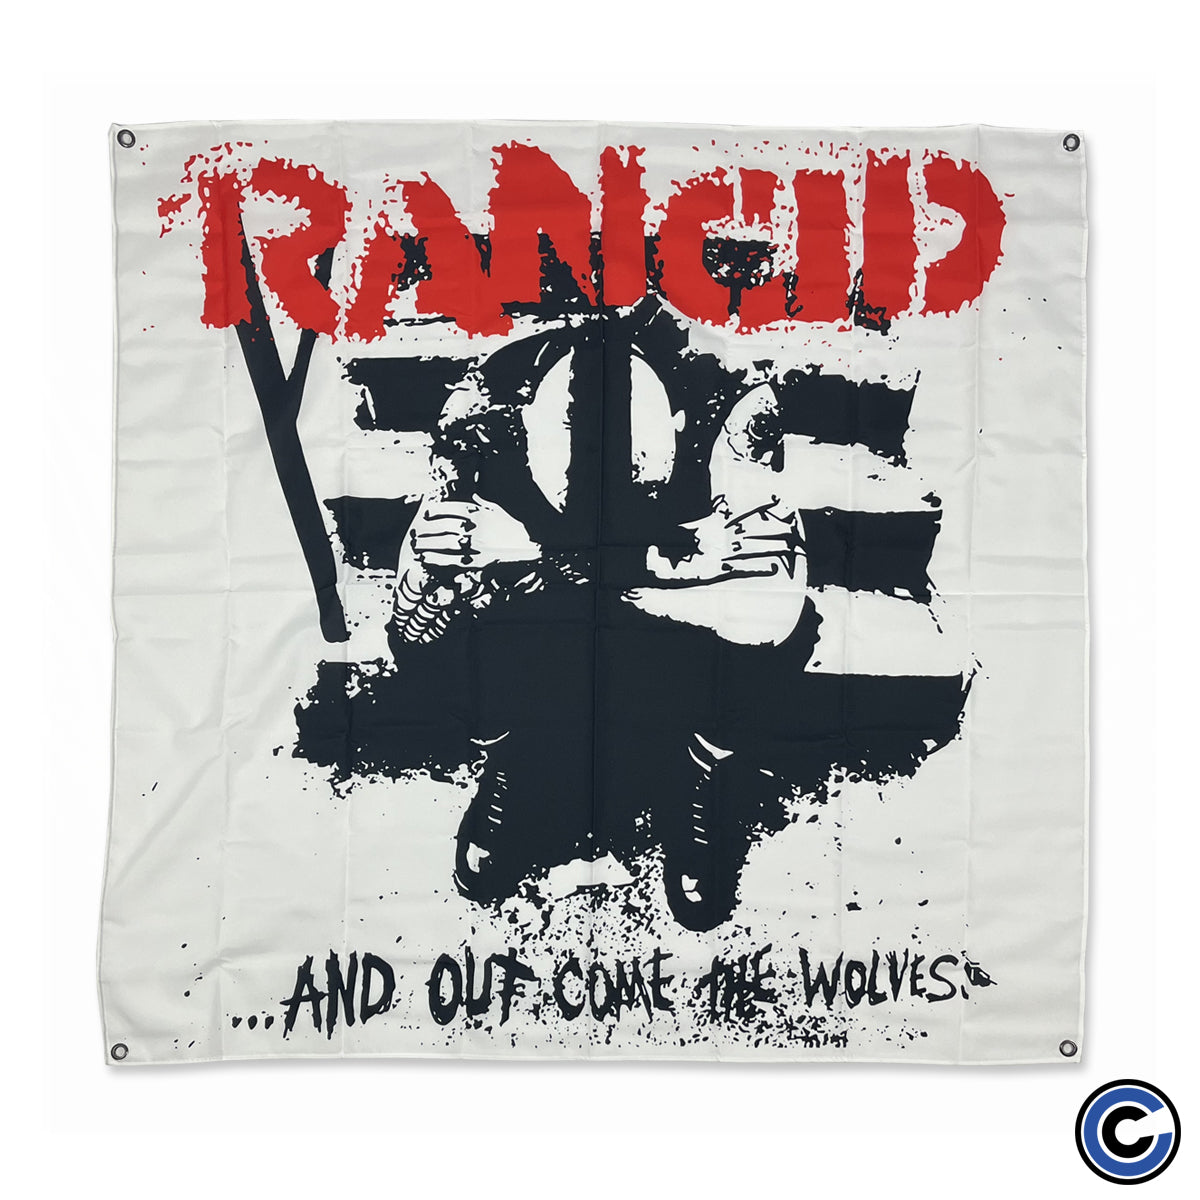 Rancid "And Out Come The Wolves" Flag